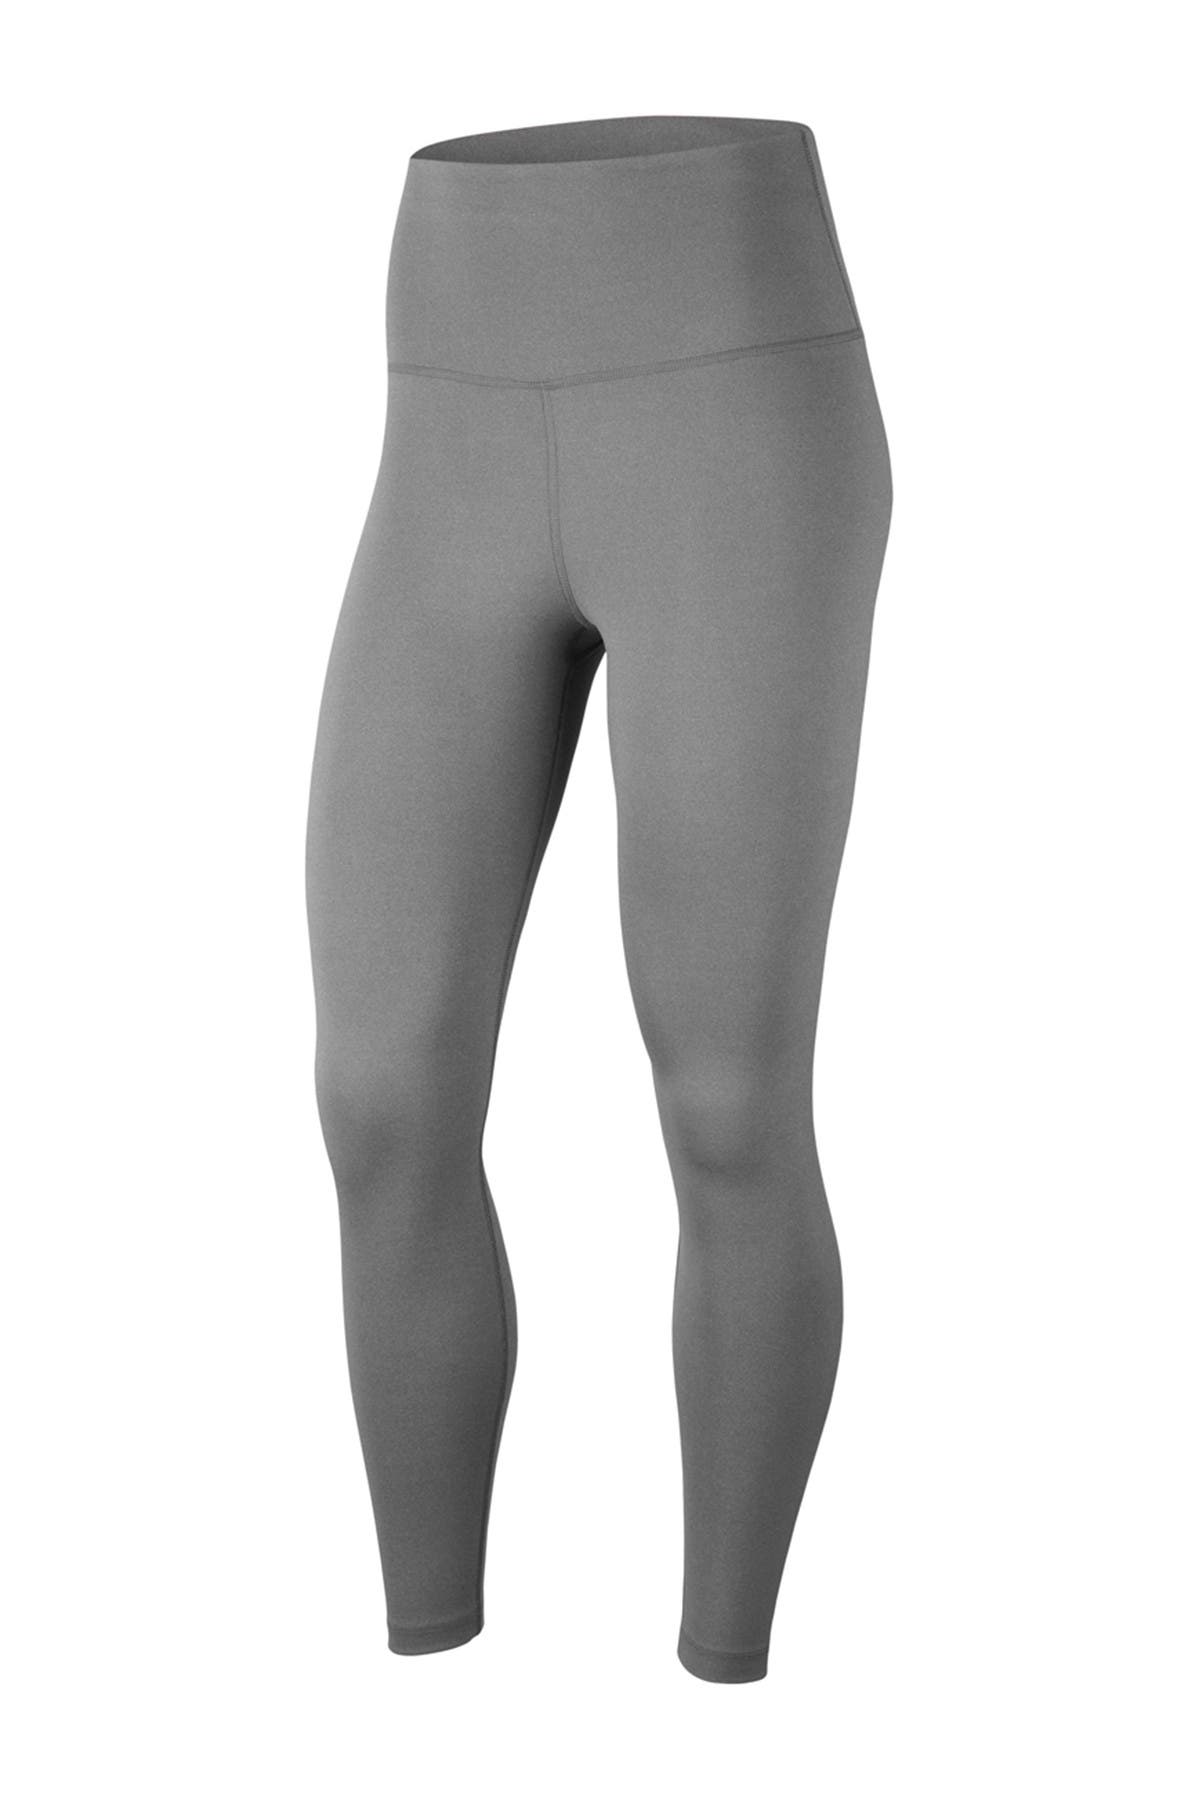 Nike Yoga 7/8 Tights In Ptclgy/plttnt